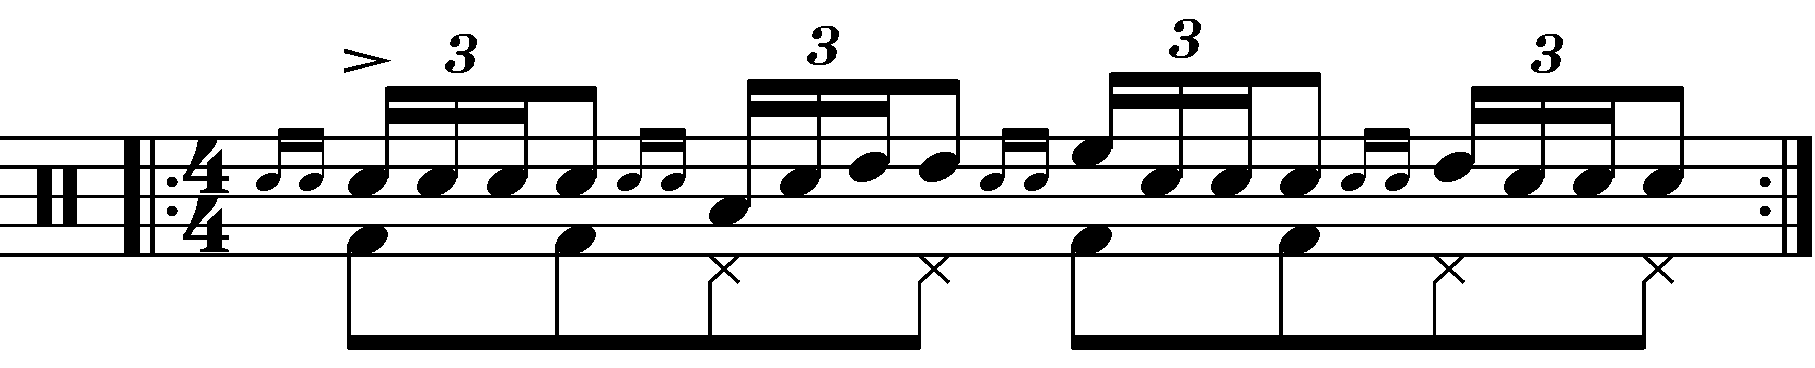 The ratamacue with moving quarter notes